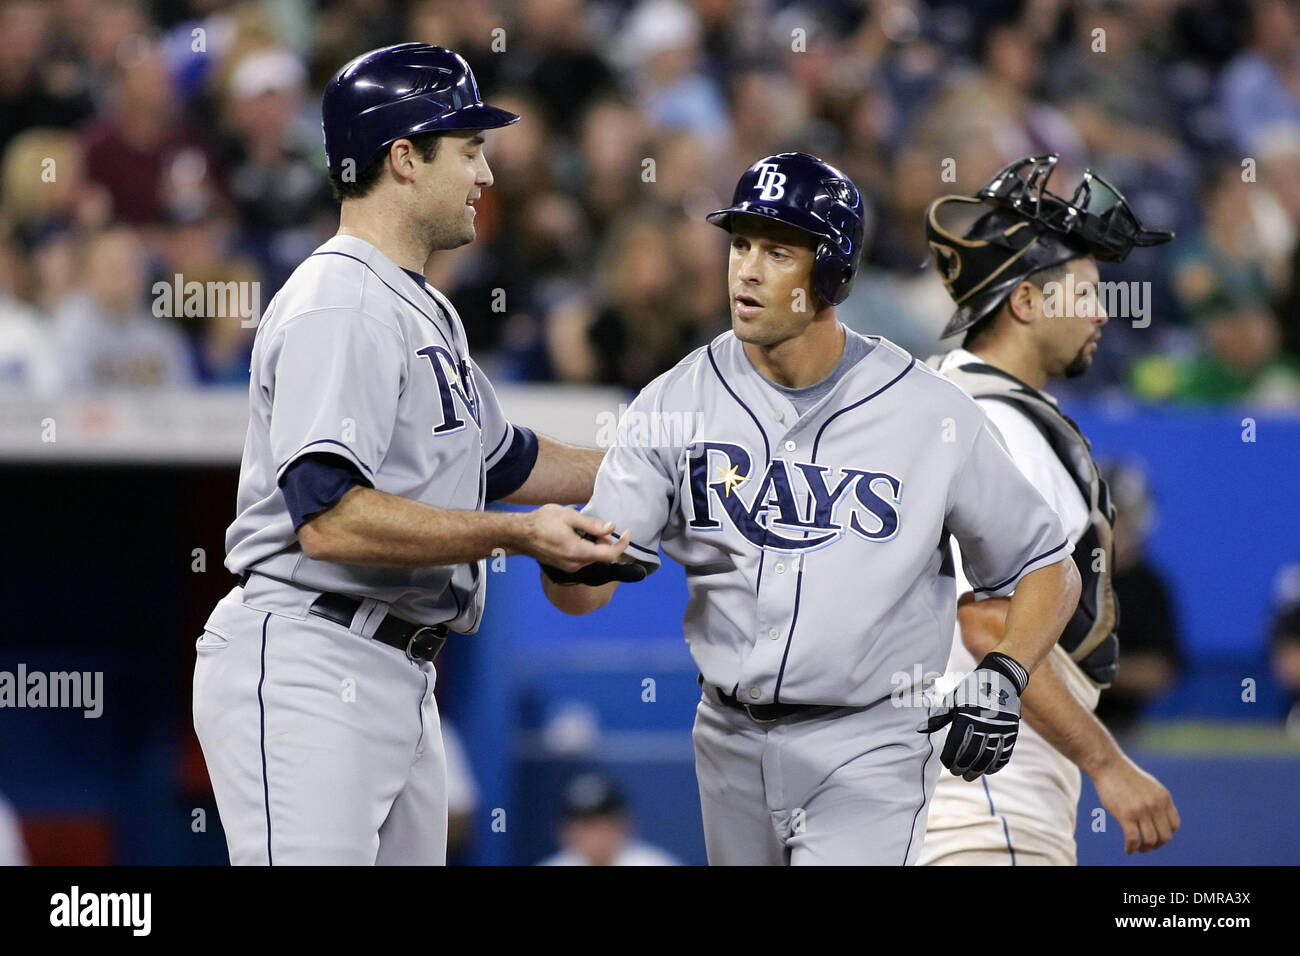 Tampa Bay Rays designated hitter Pat Burrell (L) homered and congratulates  teammate Gabe Kapler (R) after he scored against the Toronto Blue Jays at  the Rogers Centre in Toronto, ON. The Blue